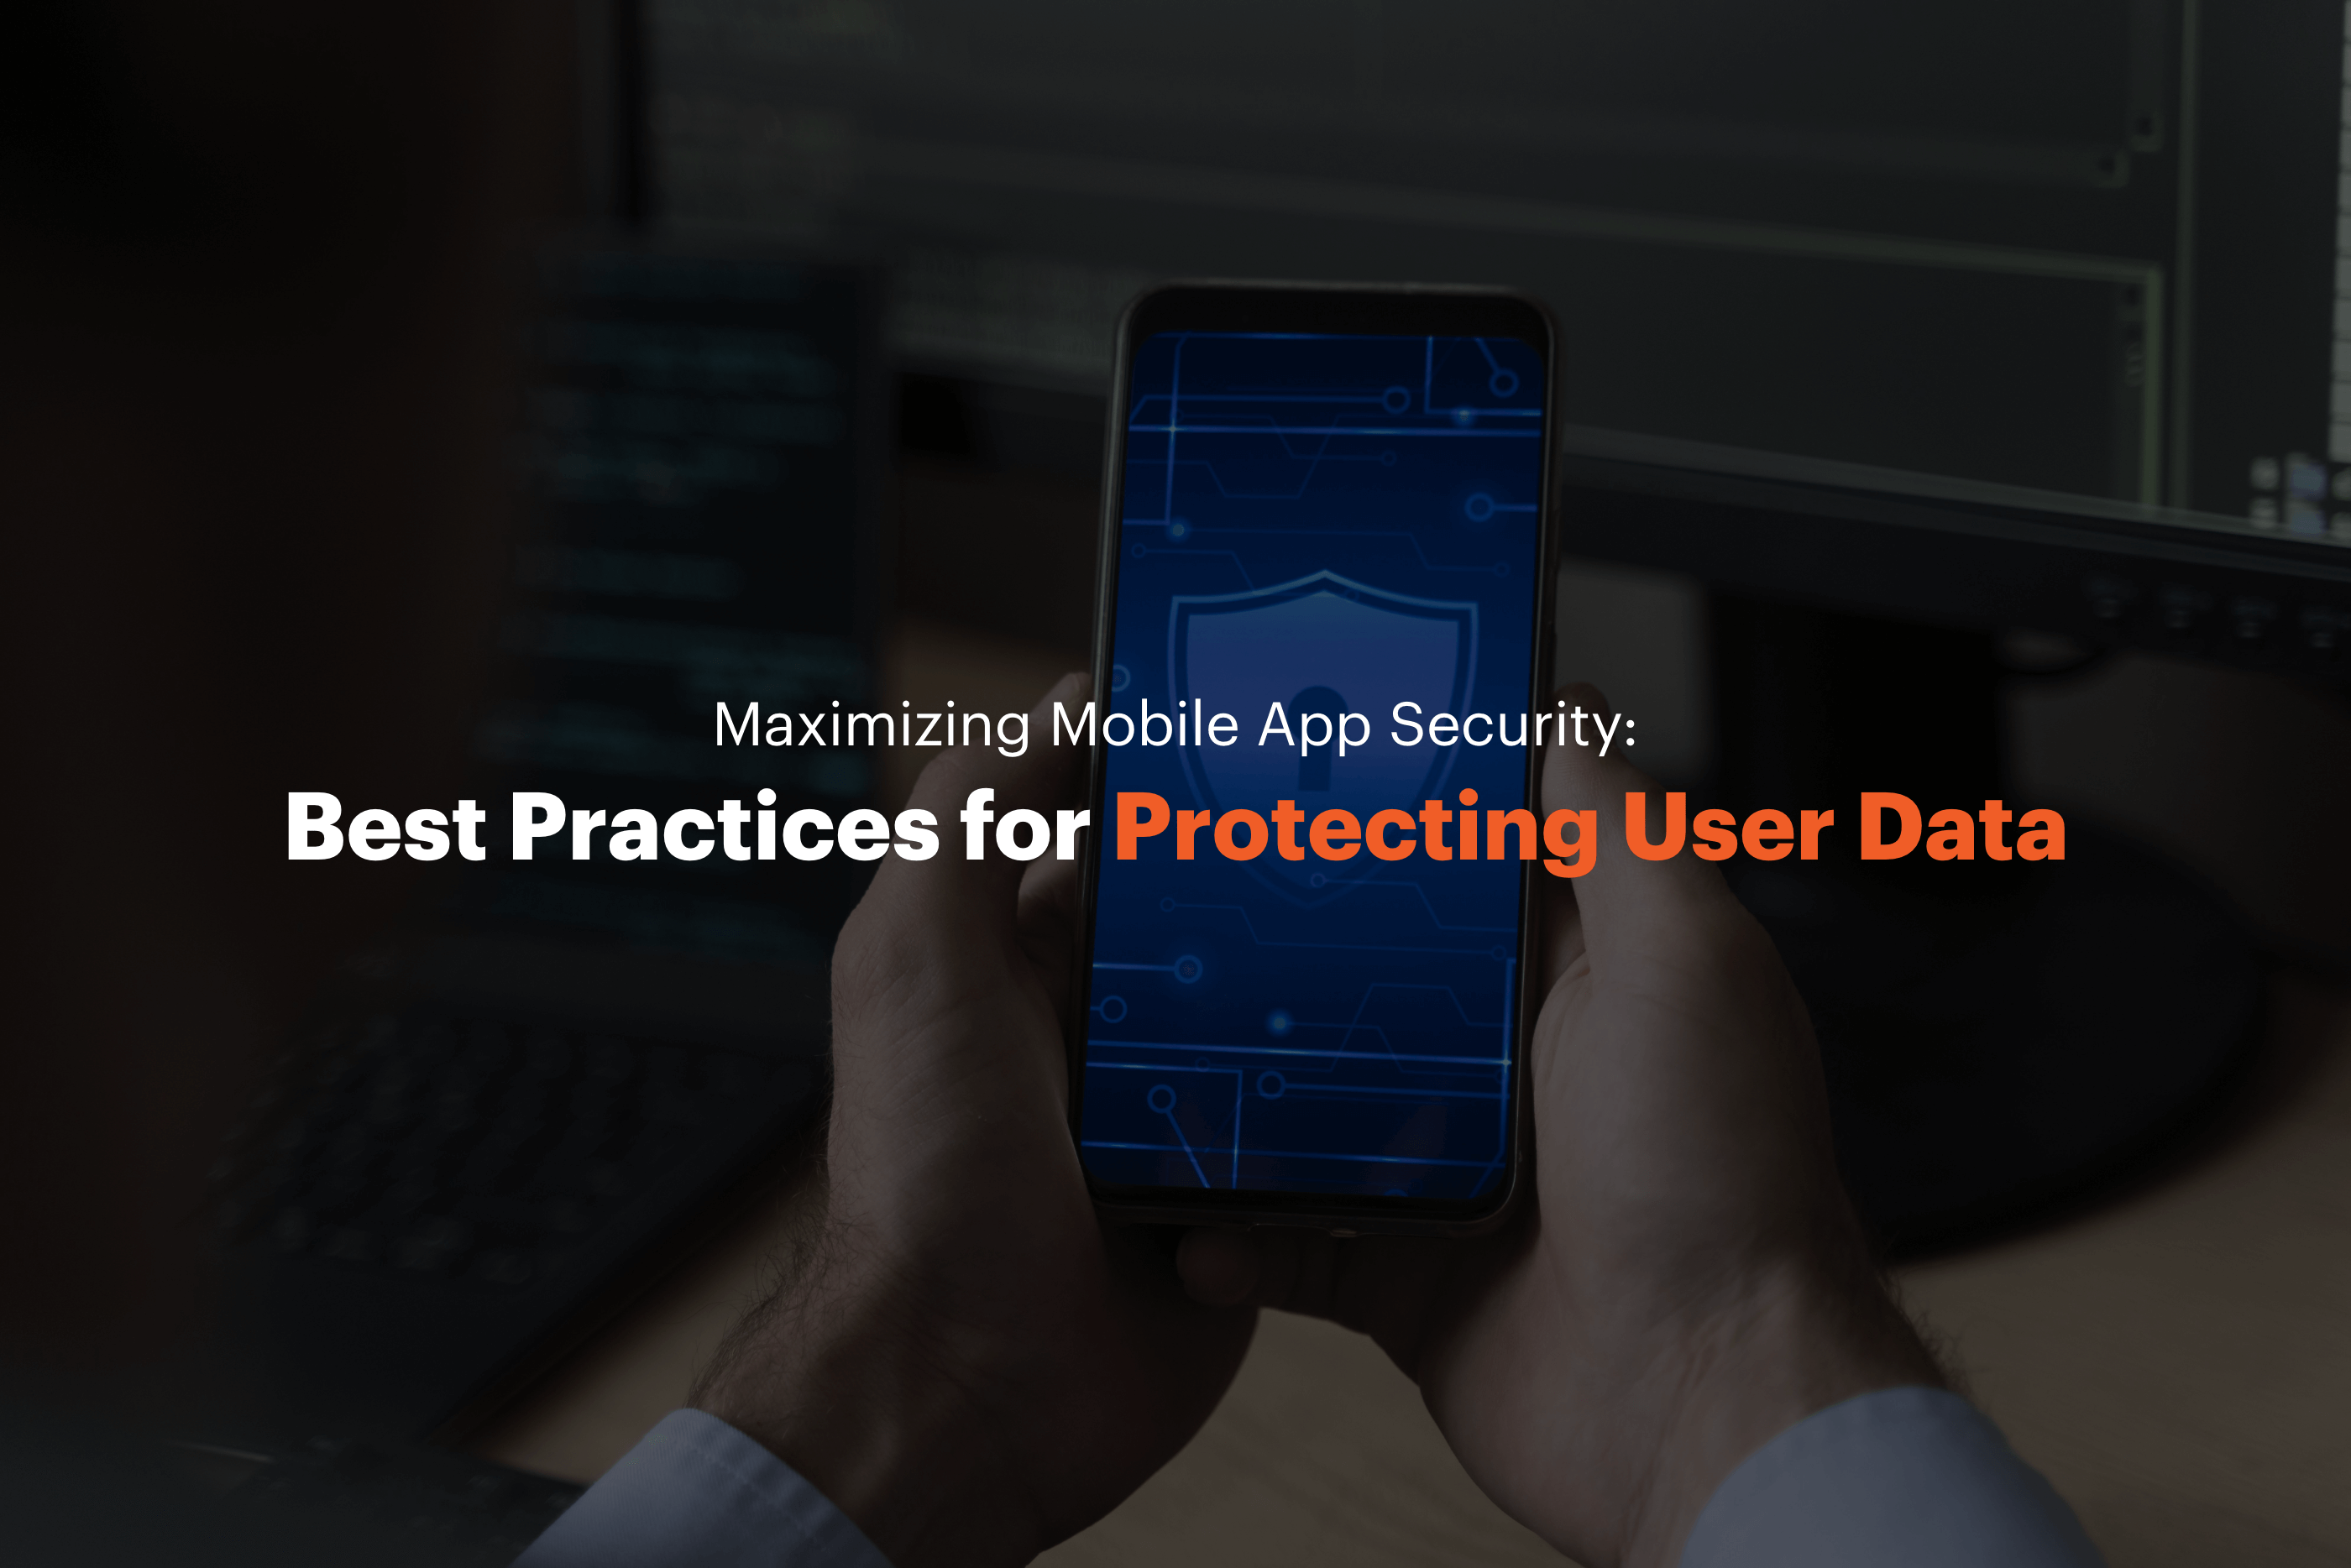 Maximizing Mobile App Security: Best Practices for Protecting User Data